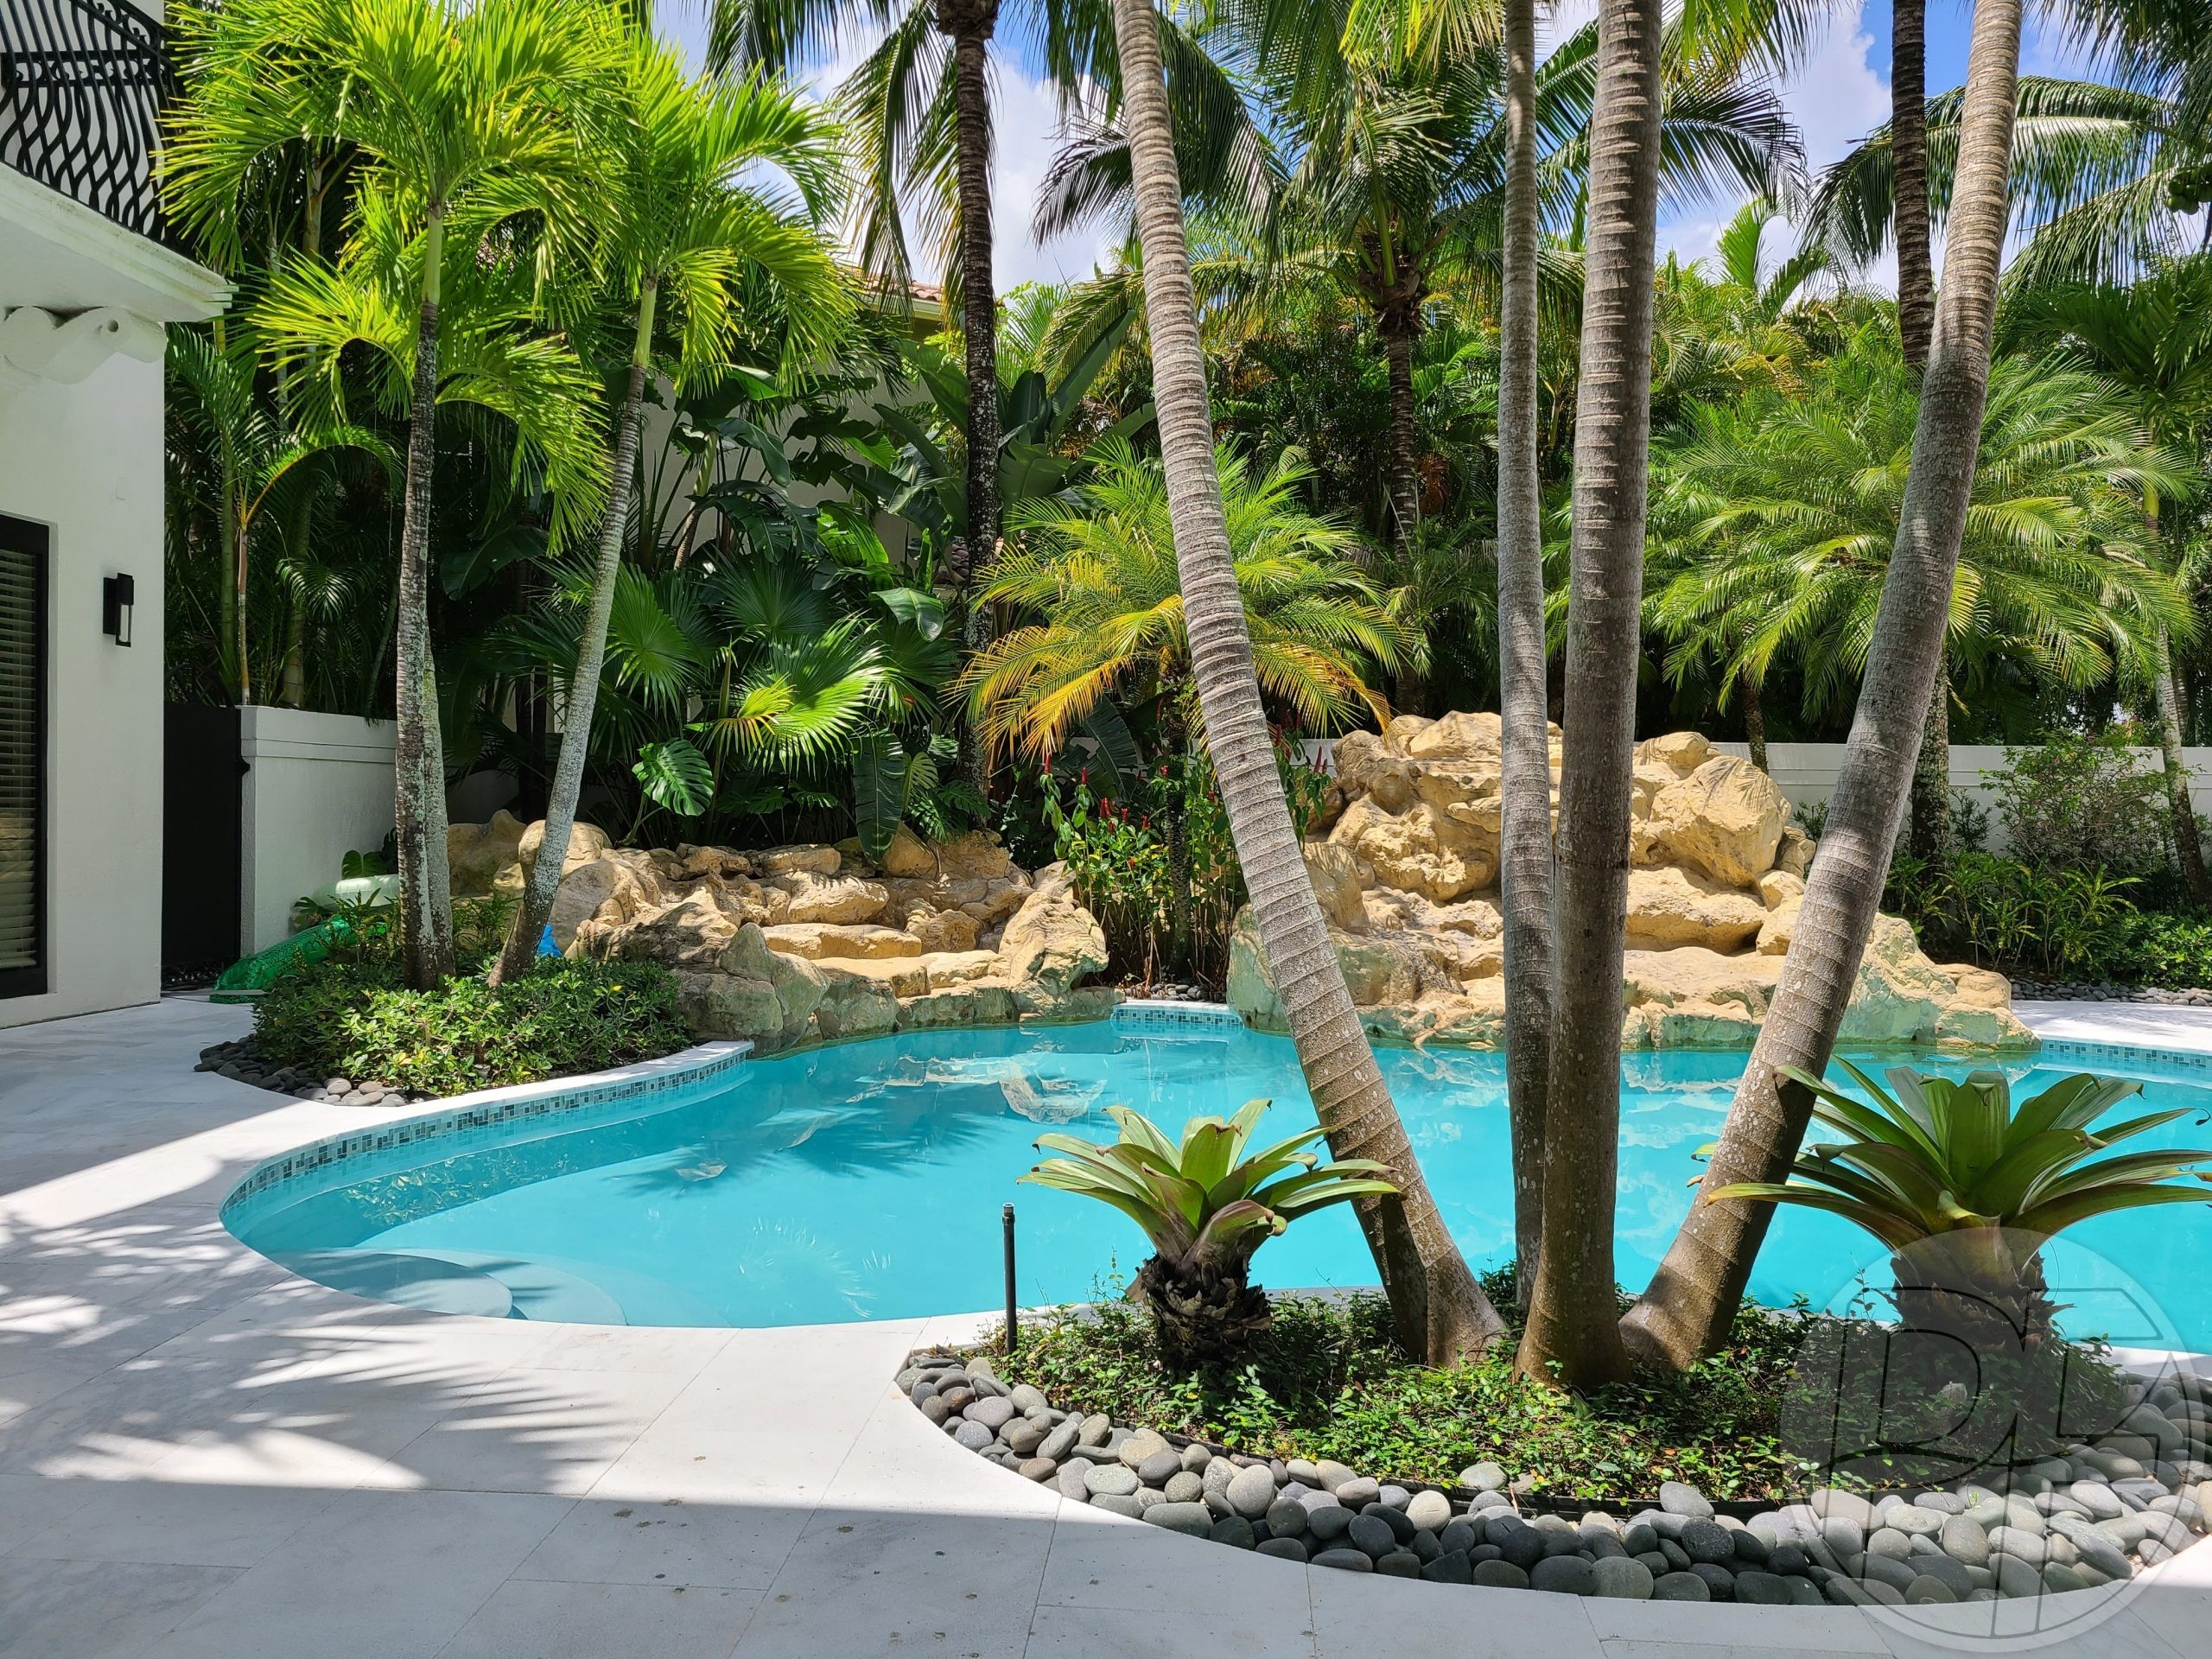 Pool & Deck Remodeling - Tropical Oasis - Pools Finishing Inc.